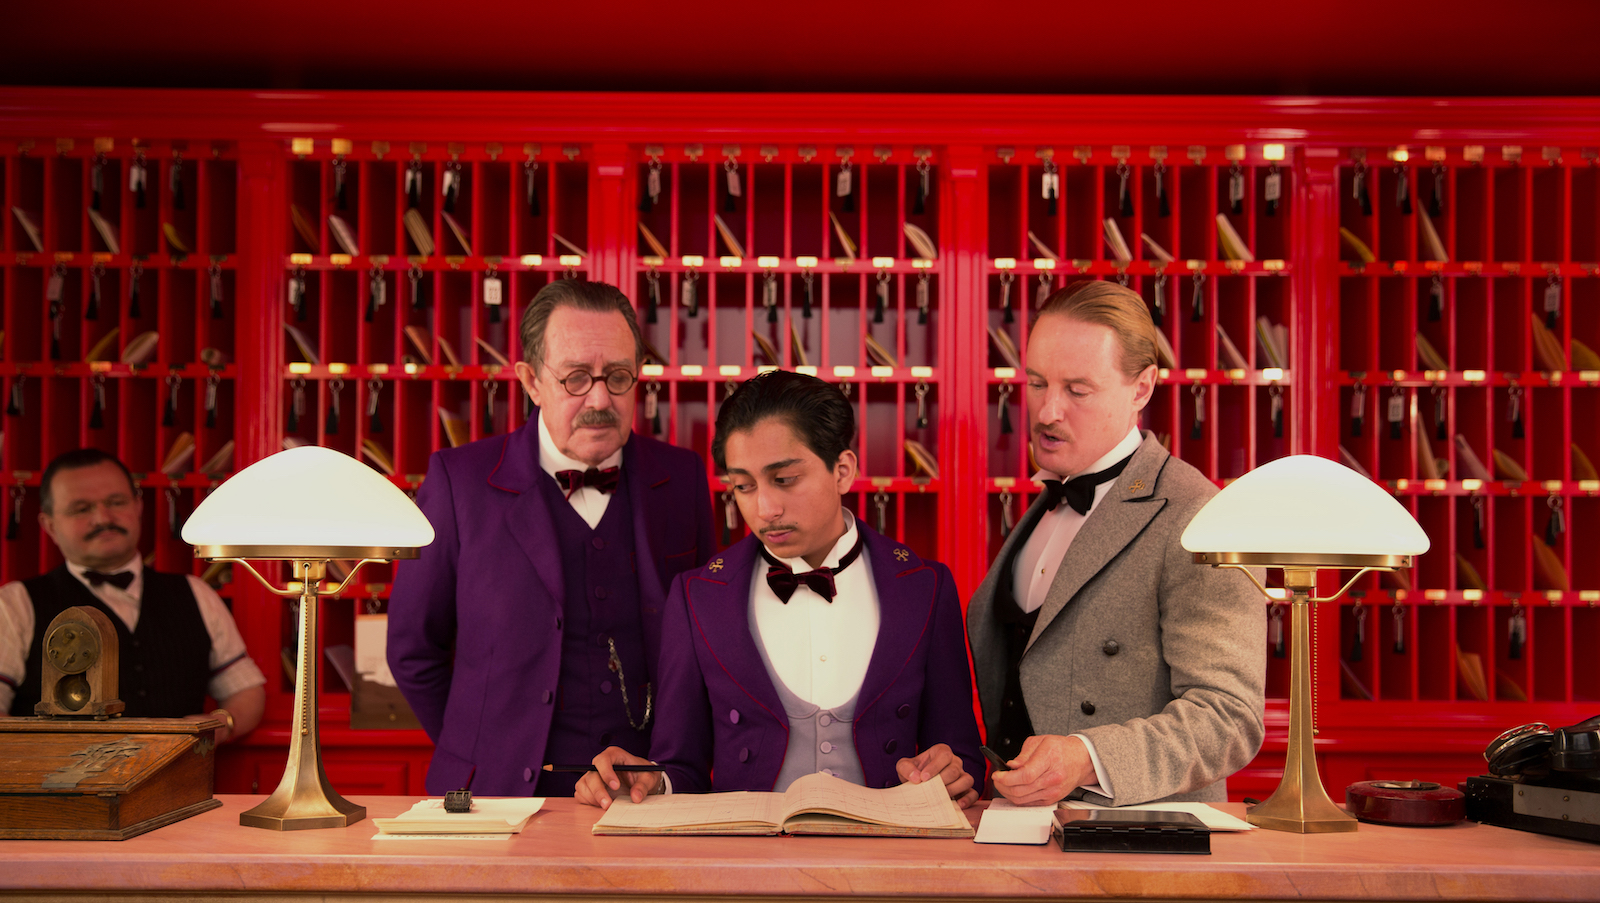 A young hotel bellboy flanked by two older mustachioed men against a red front desk backdrop